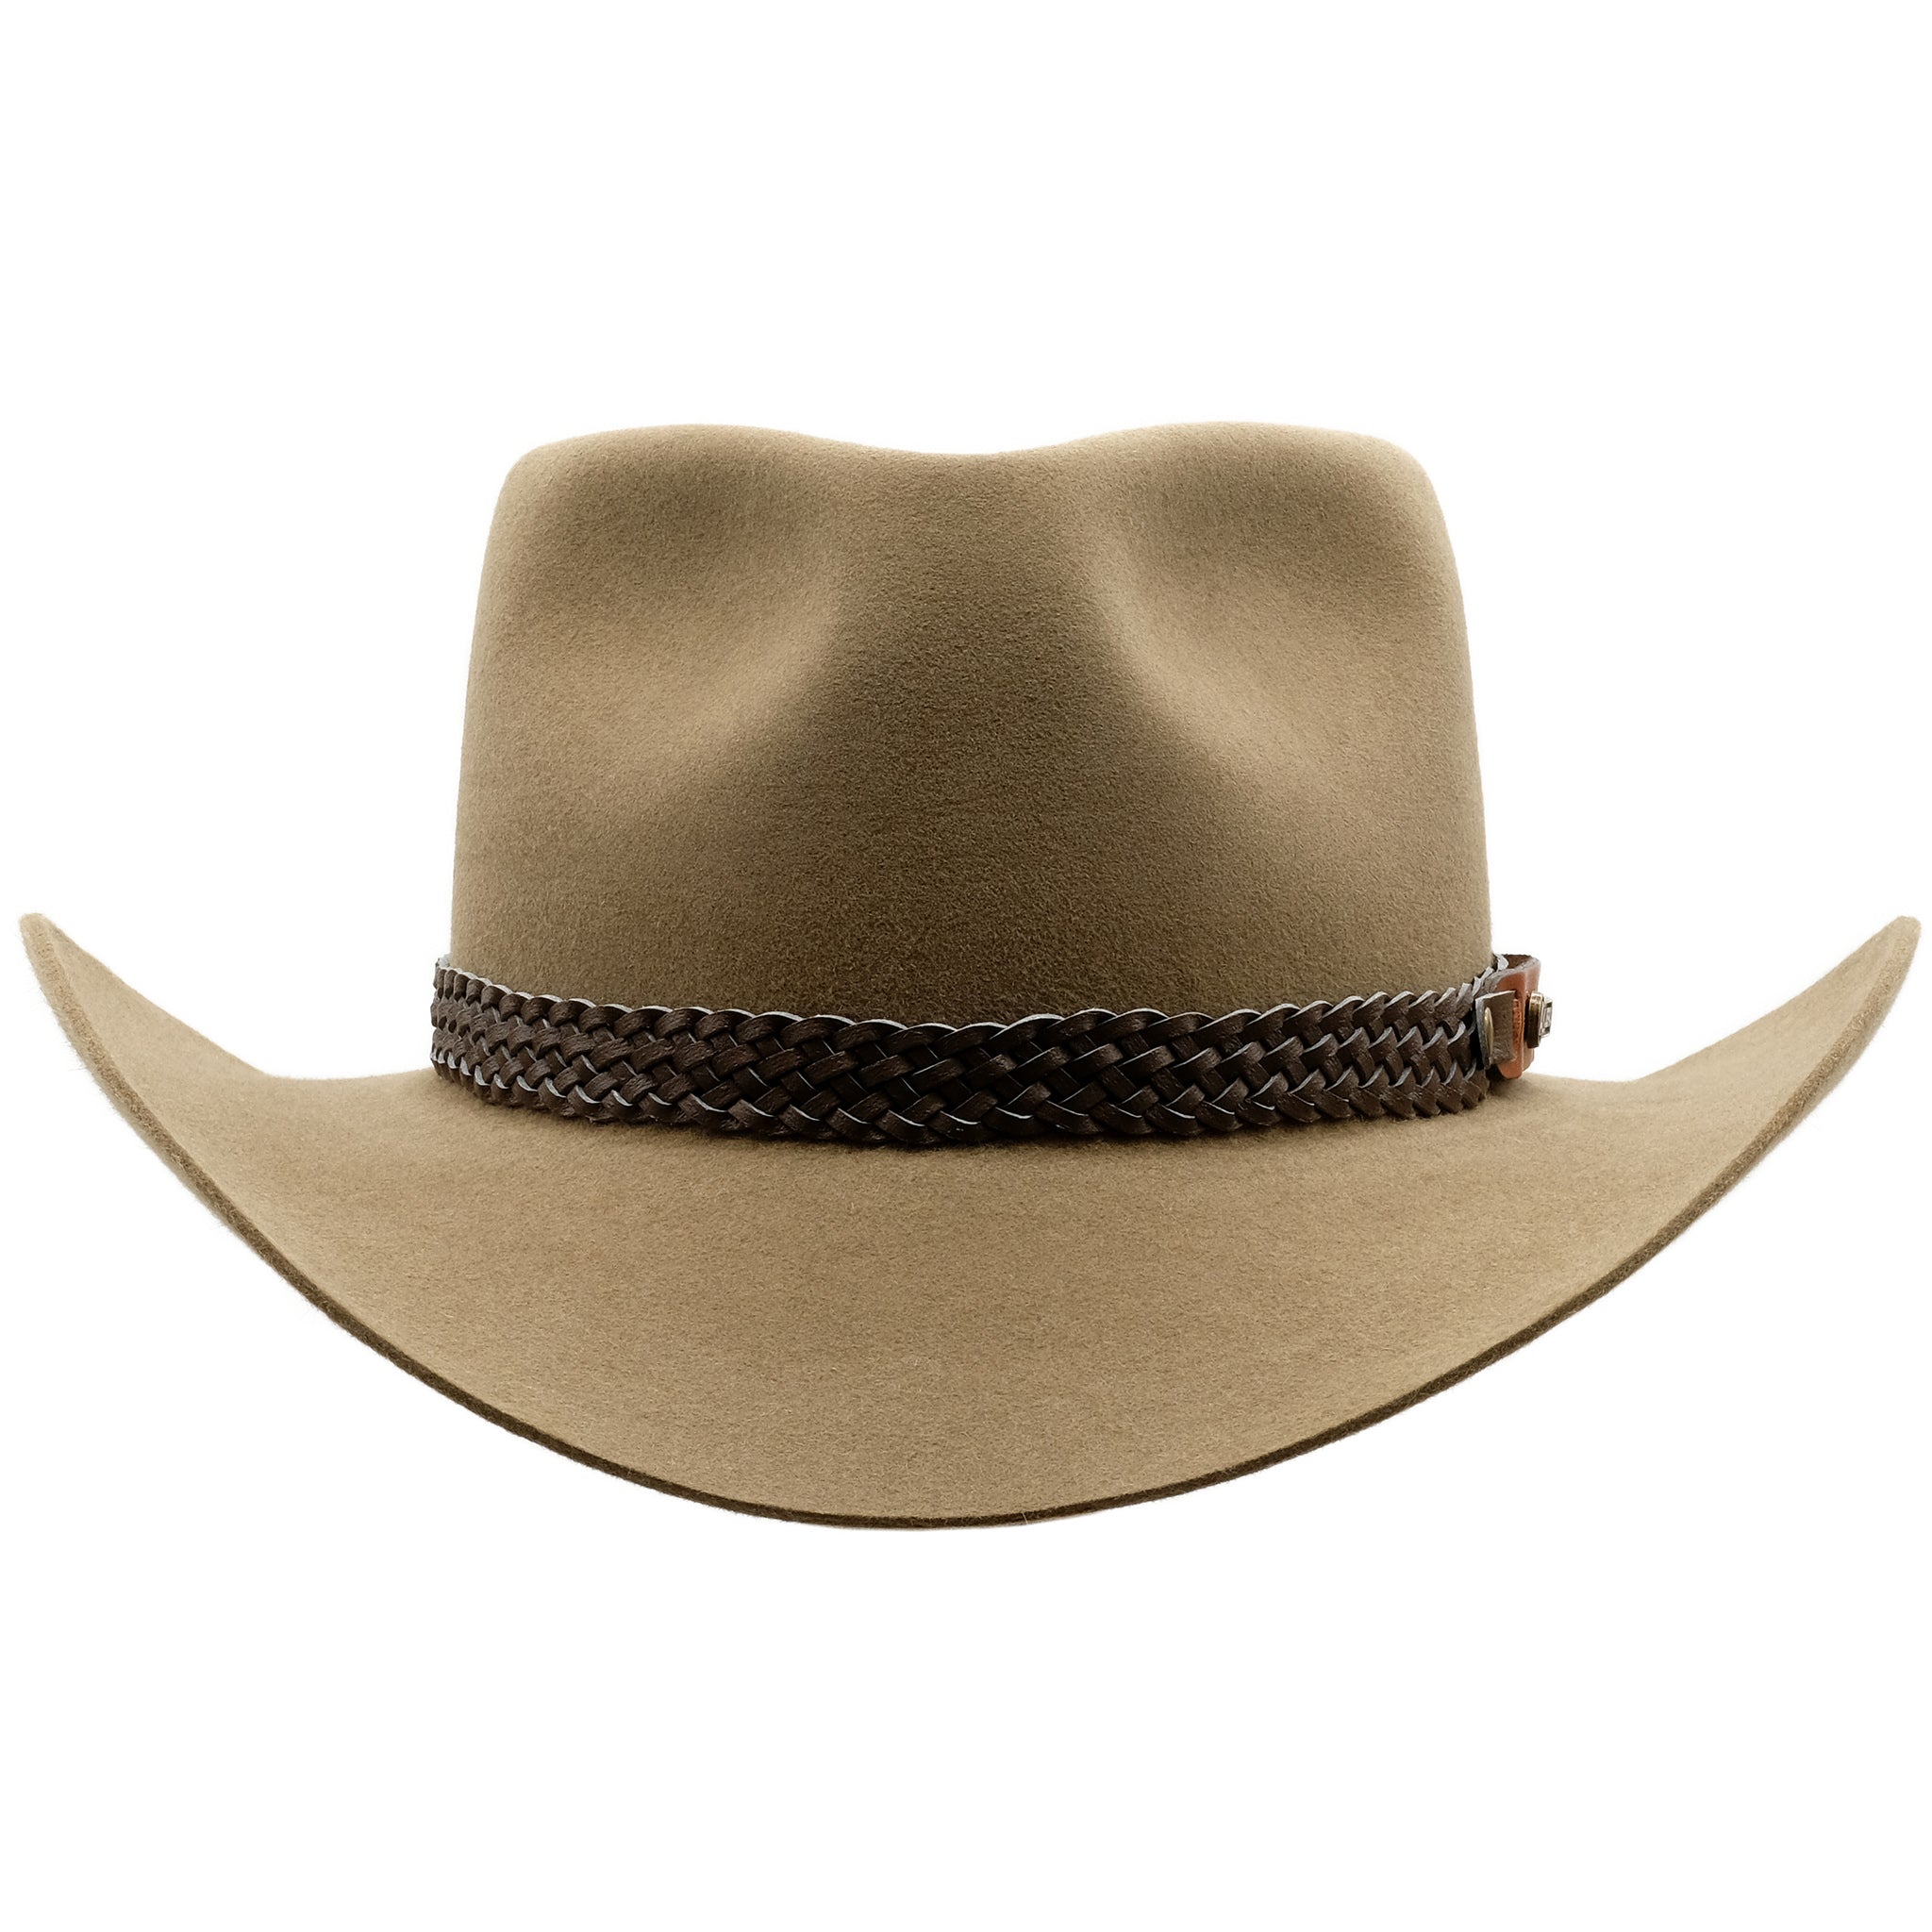 Front view of Akubra Snowy River hat in Santone colour